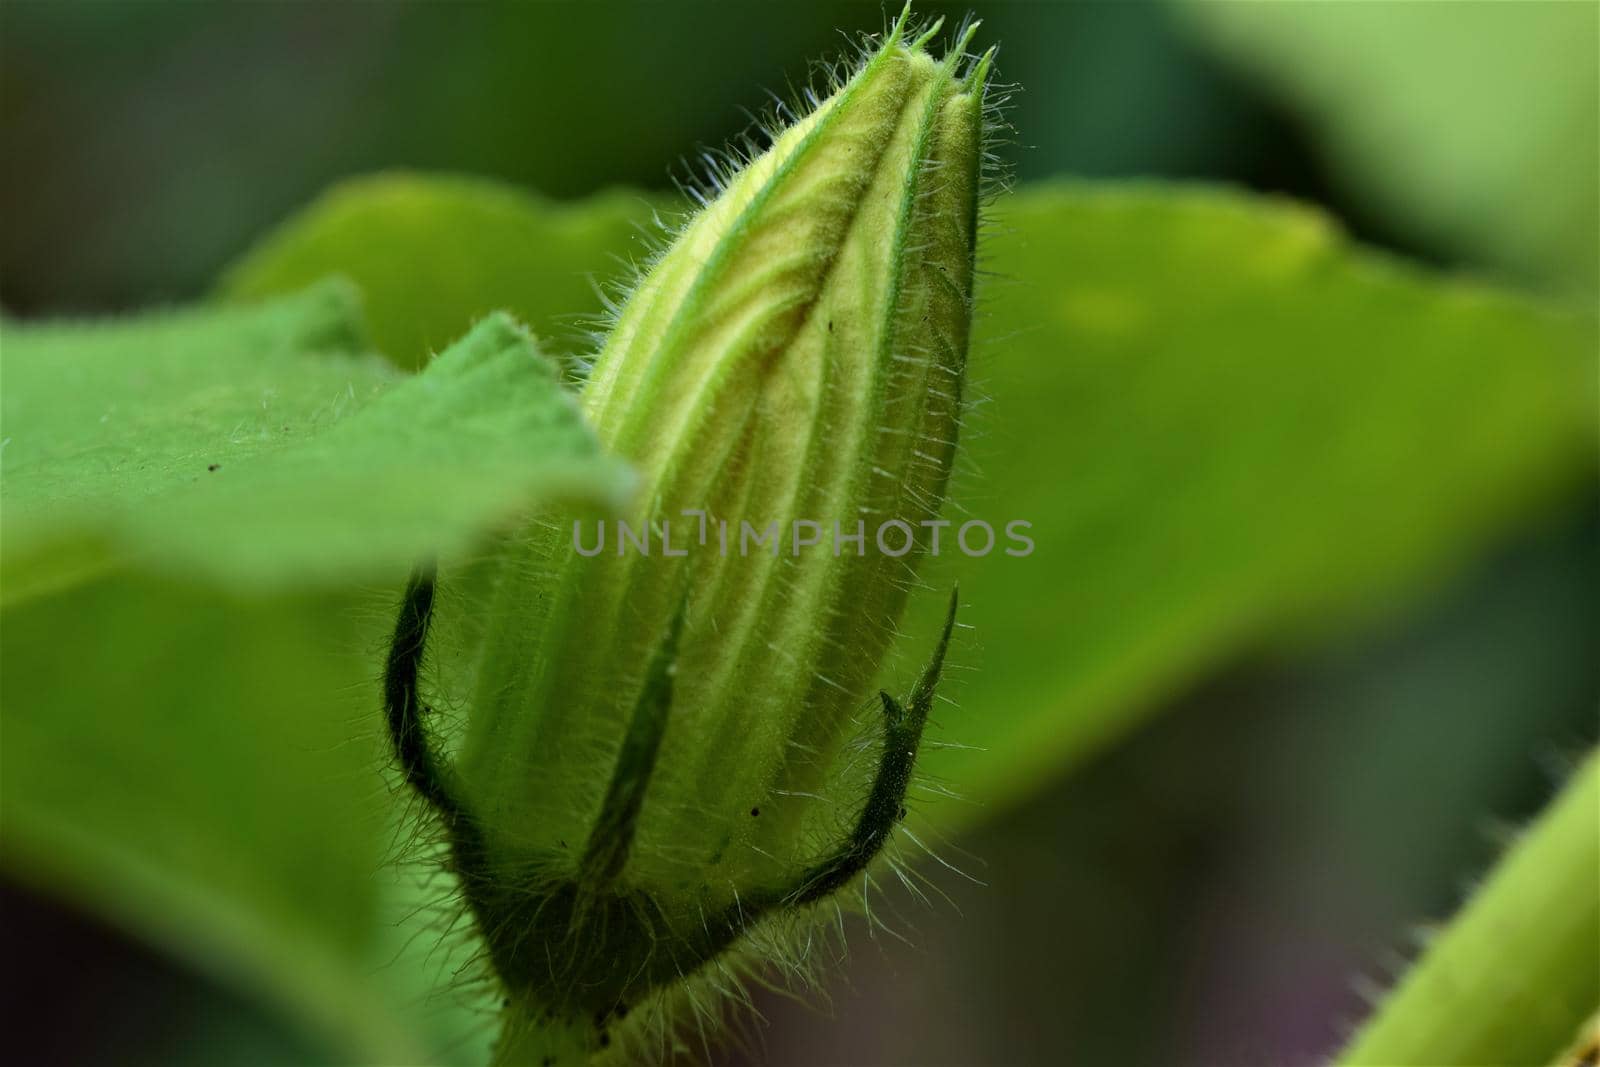 One green closed pumkin blossoms against a green blurred leave by Luise123